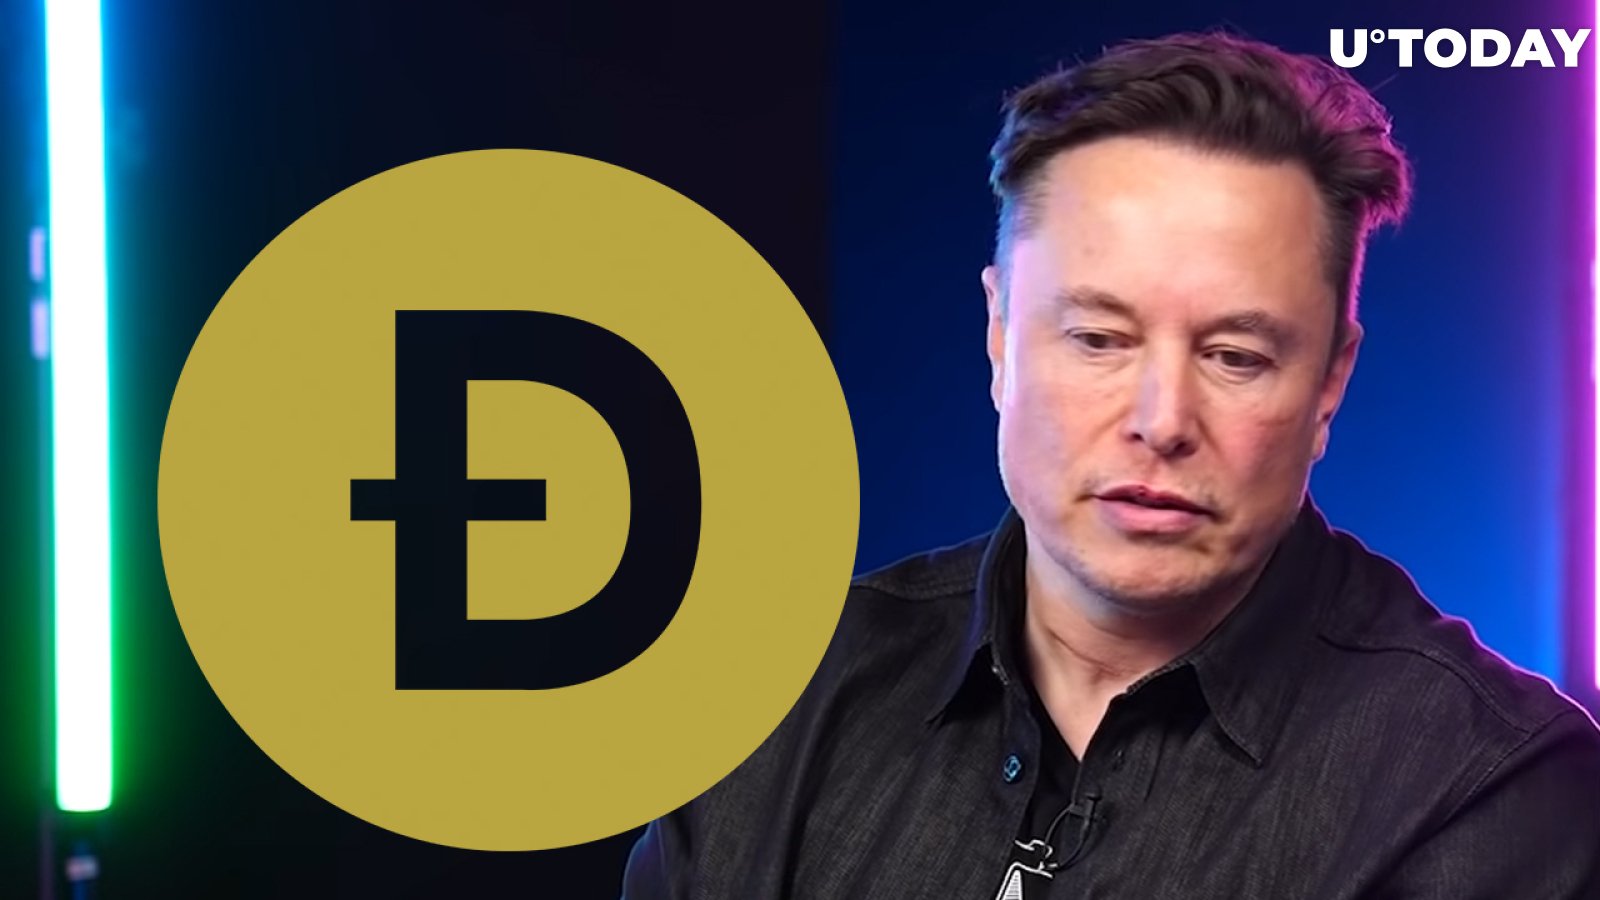 Dogecoin Enthusiast Elon Musk's Twitter Deal Is in Danger as 90% of Platform's Daily Users Are Potentially Bots